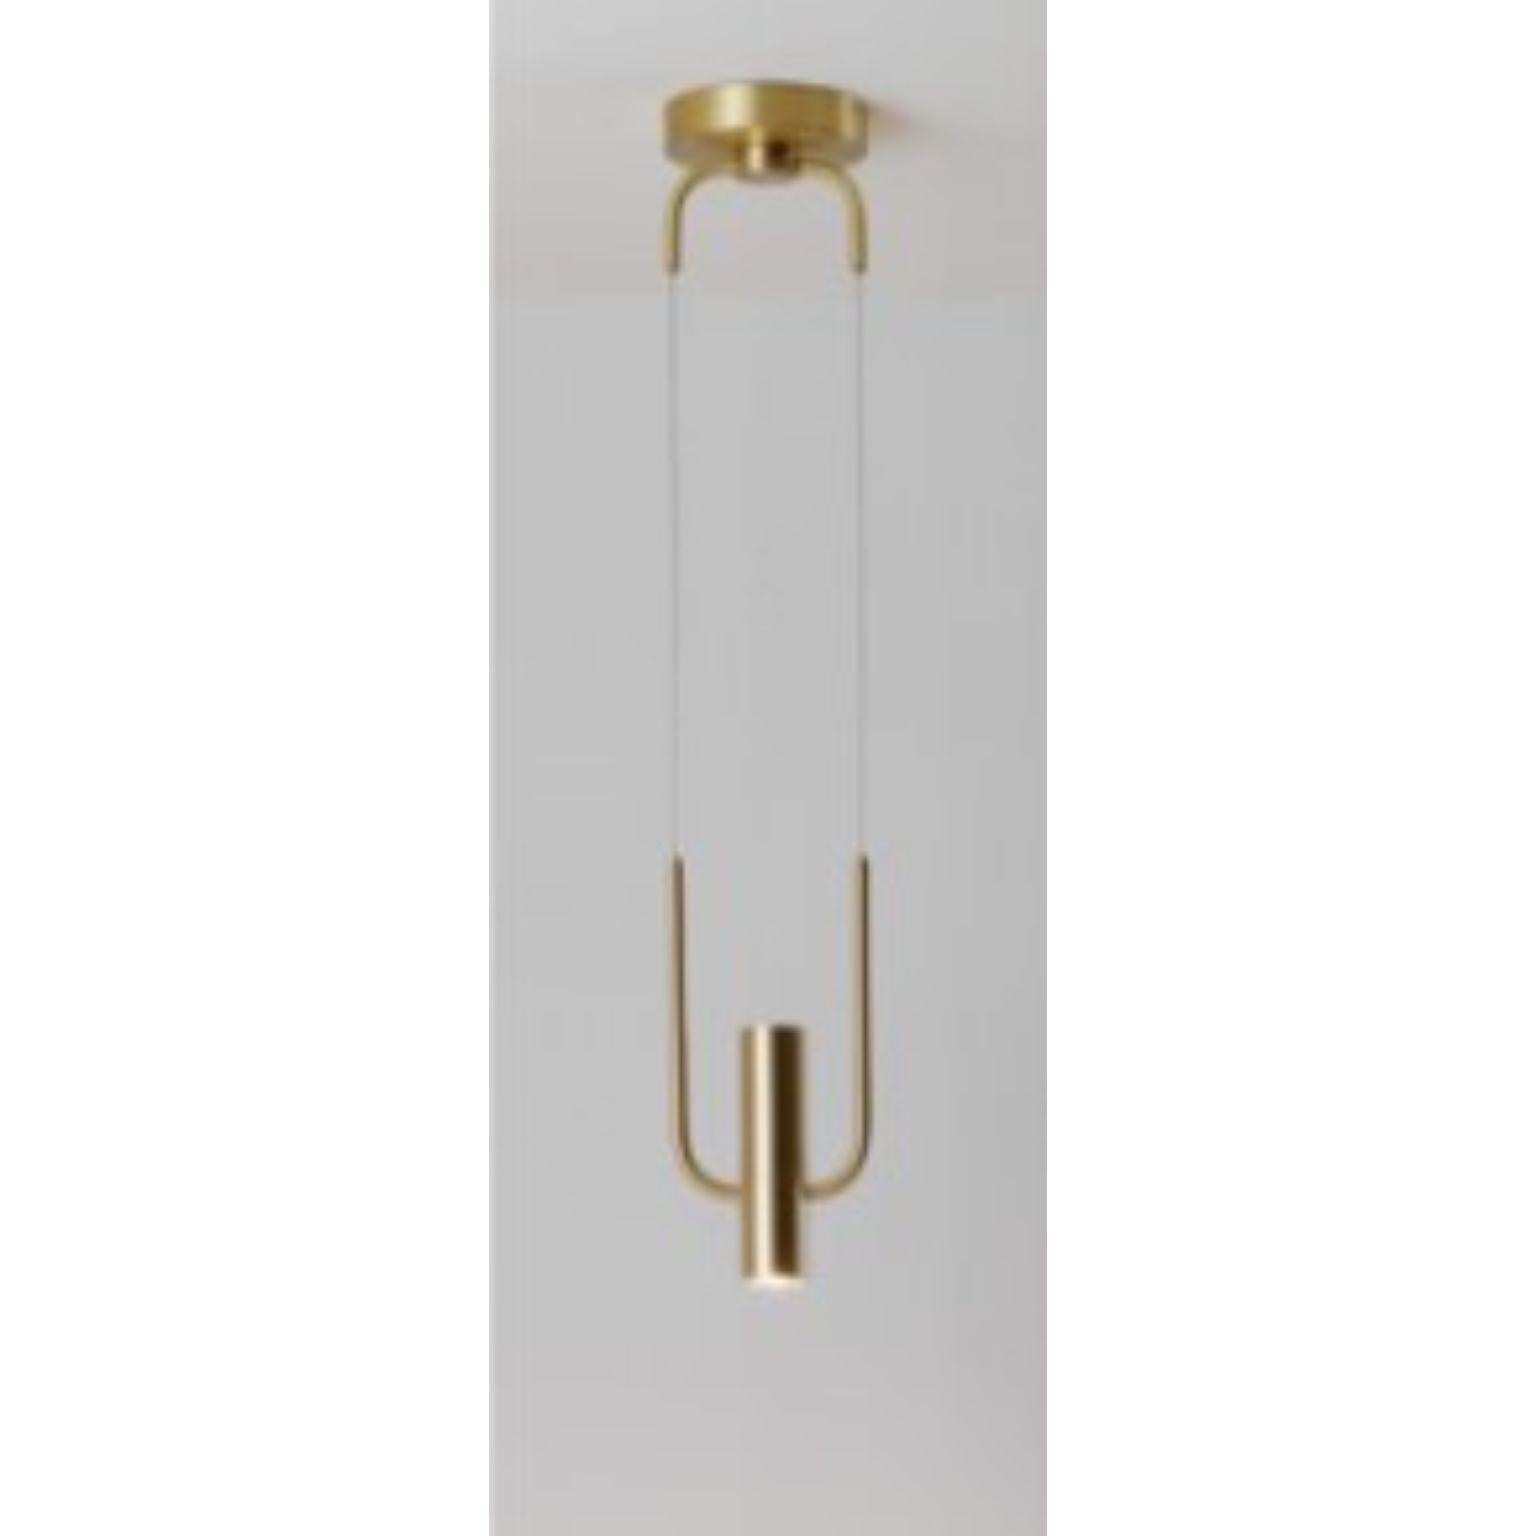 Storm Pendant by Emilie Cathelineau
Dimensions: D15.6 x W5 X H200 cm
Materials: Solid brass, White Polycarbonate.
Others finishes are available.

All our lamps can be wired according to each country. If sold to the USA it will be wired for the